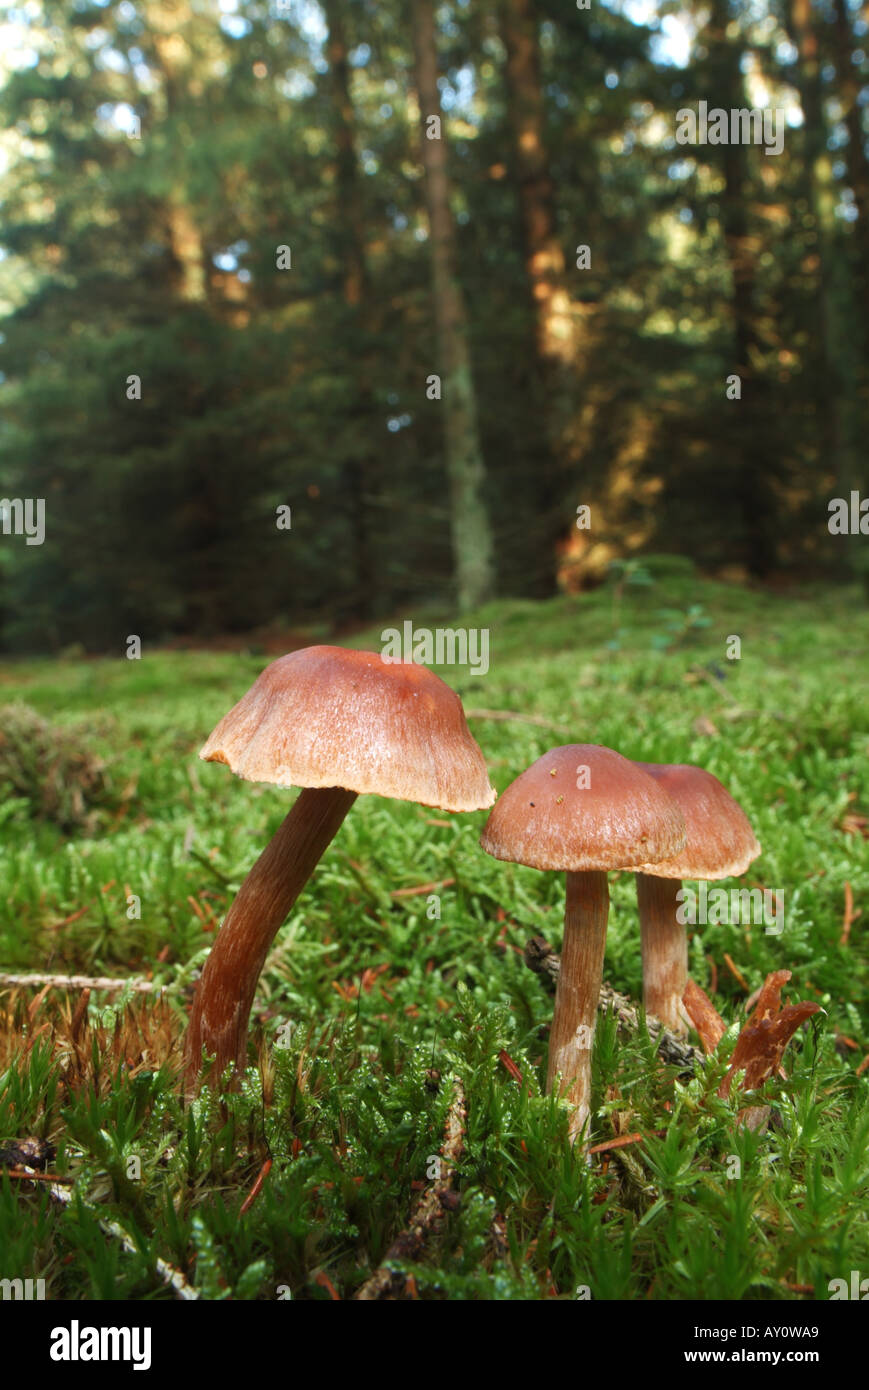 Mushrooms in a spruce forest Stock Photo